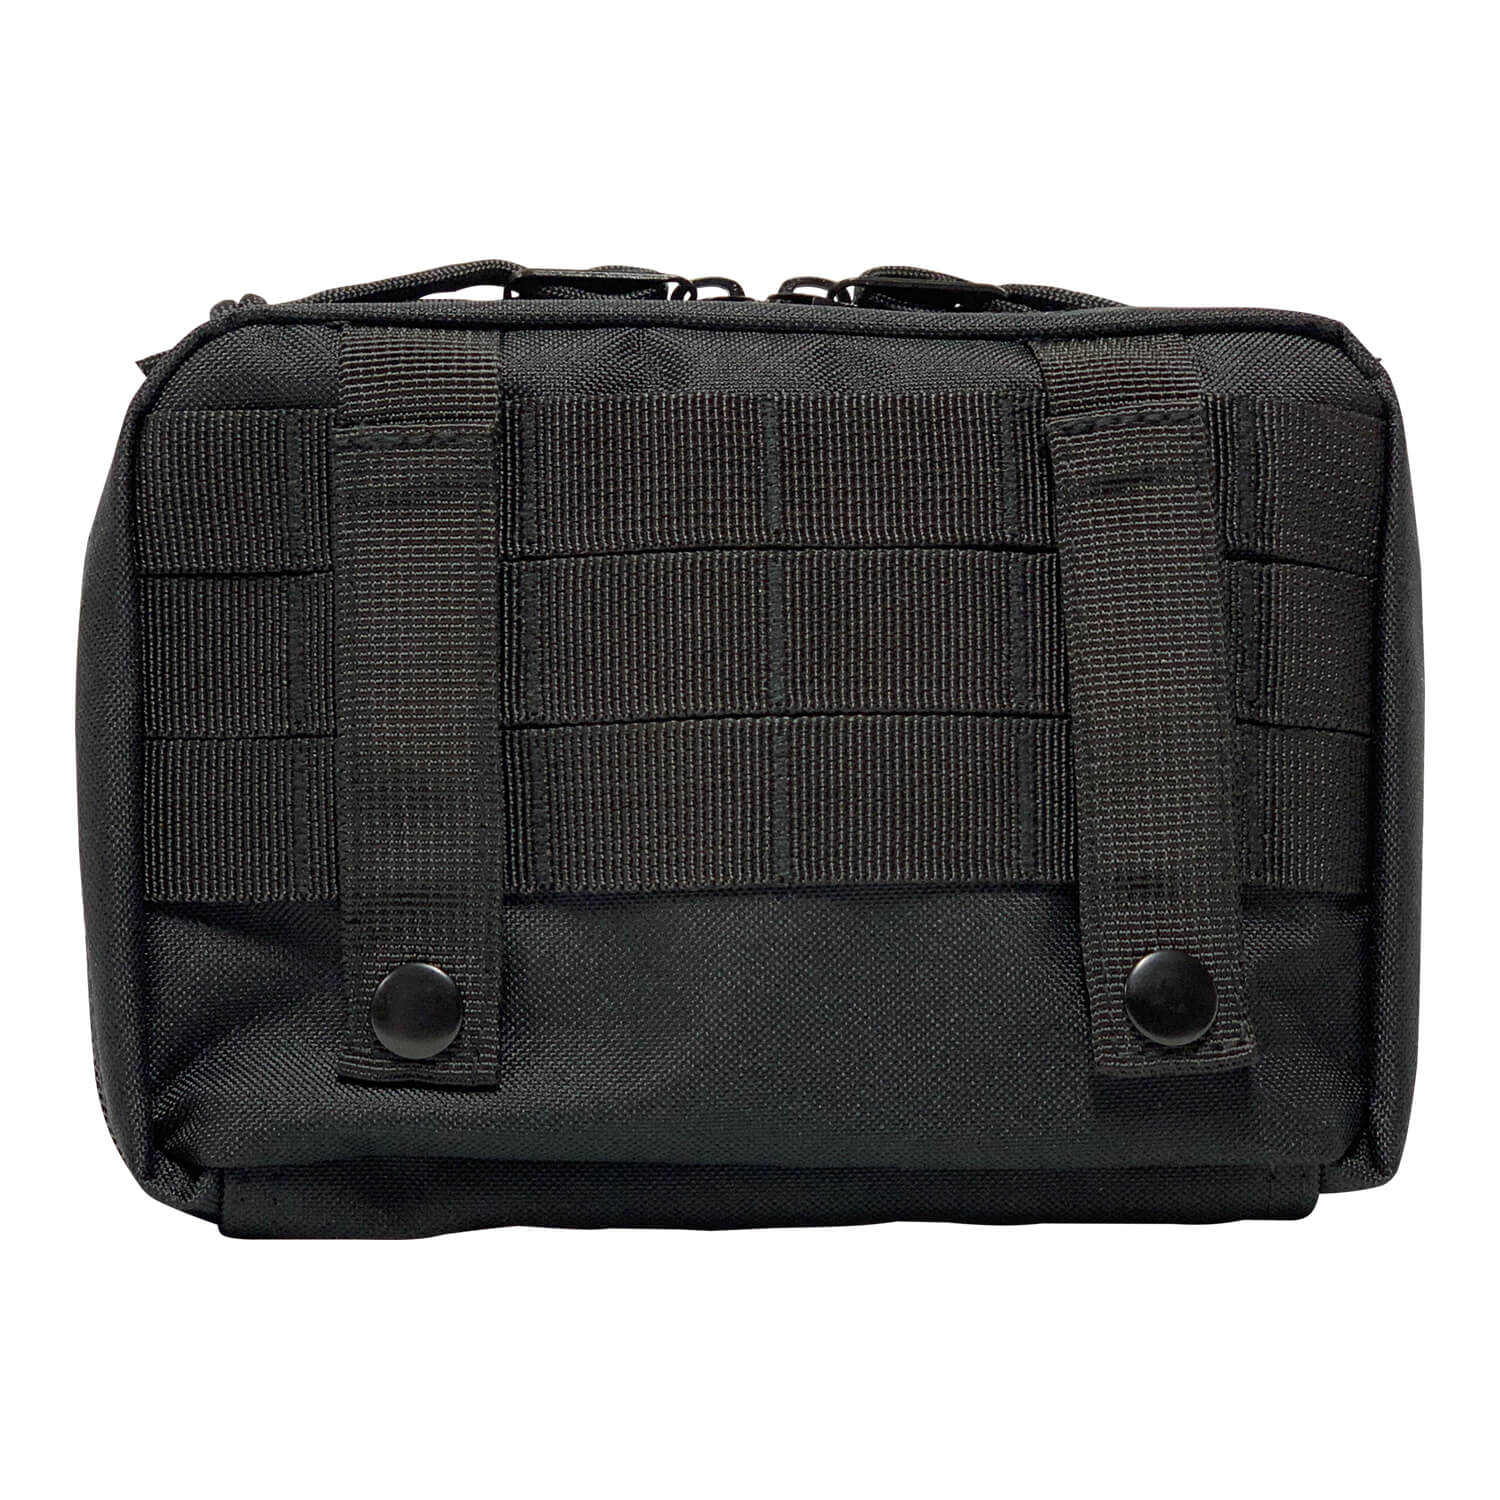 First Aid Kit Pouches - Black - Front